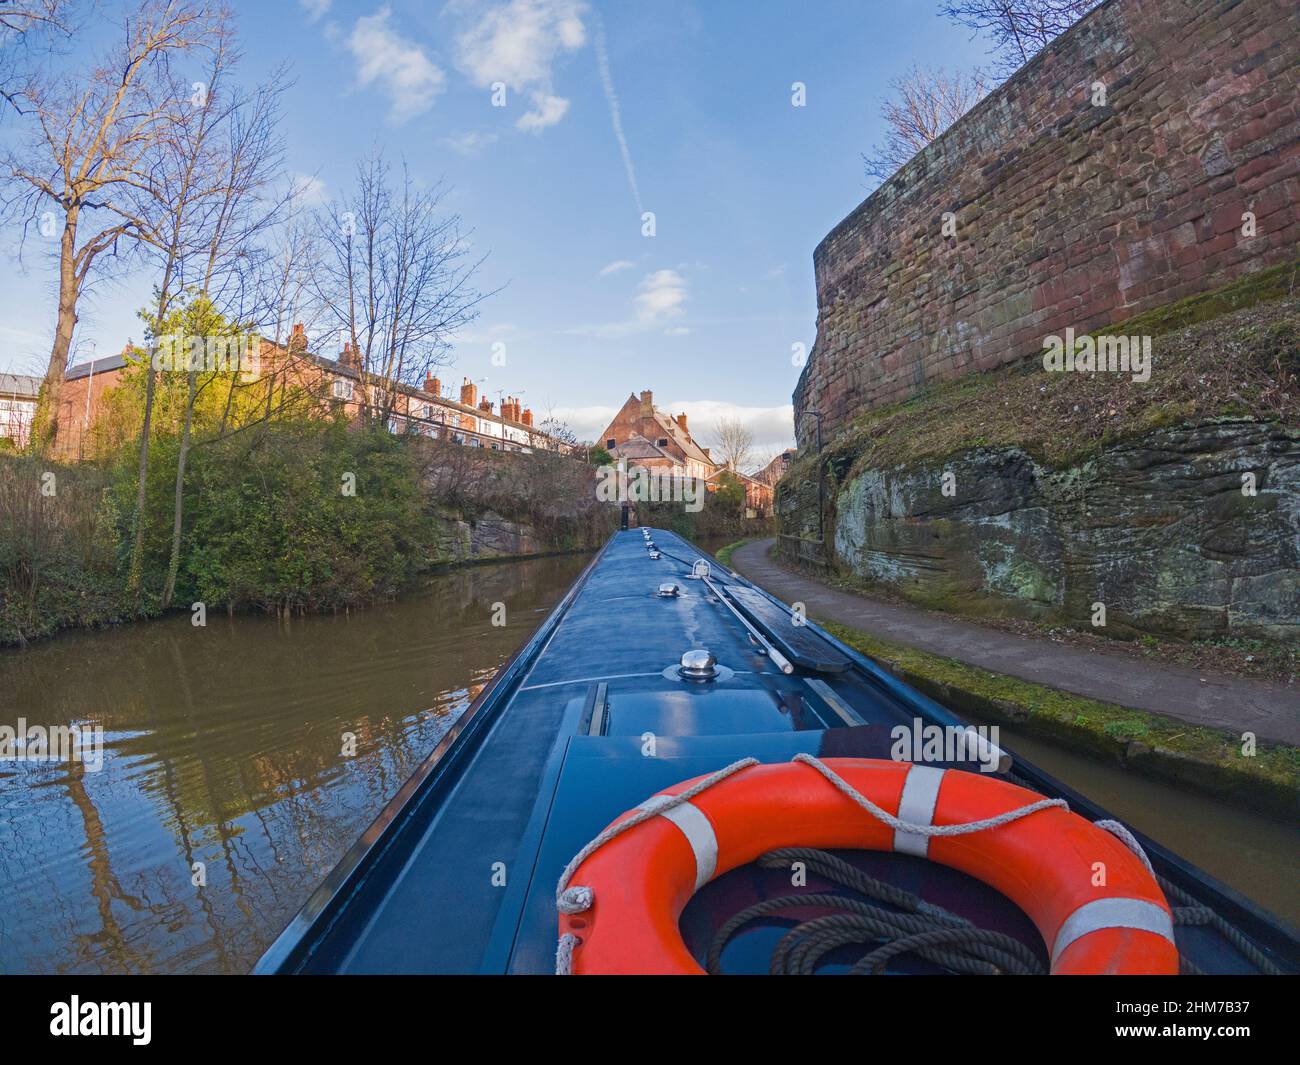 View from narrowboat traveling through English urban scenery on British canal with old city walls Stock Photo